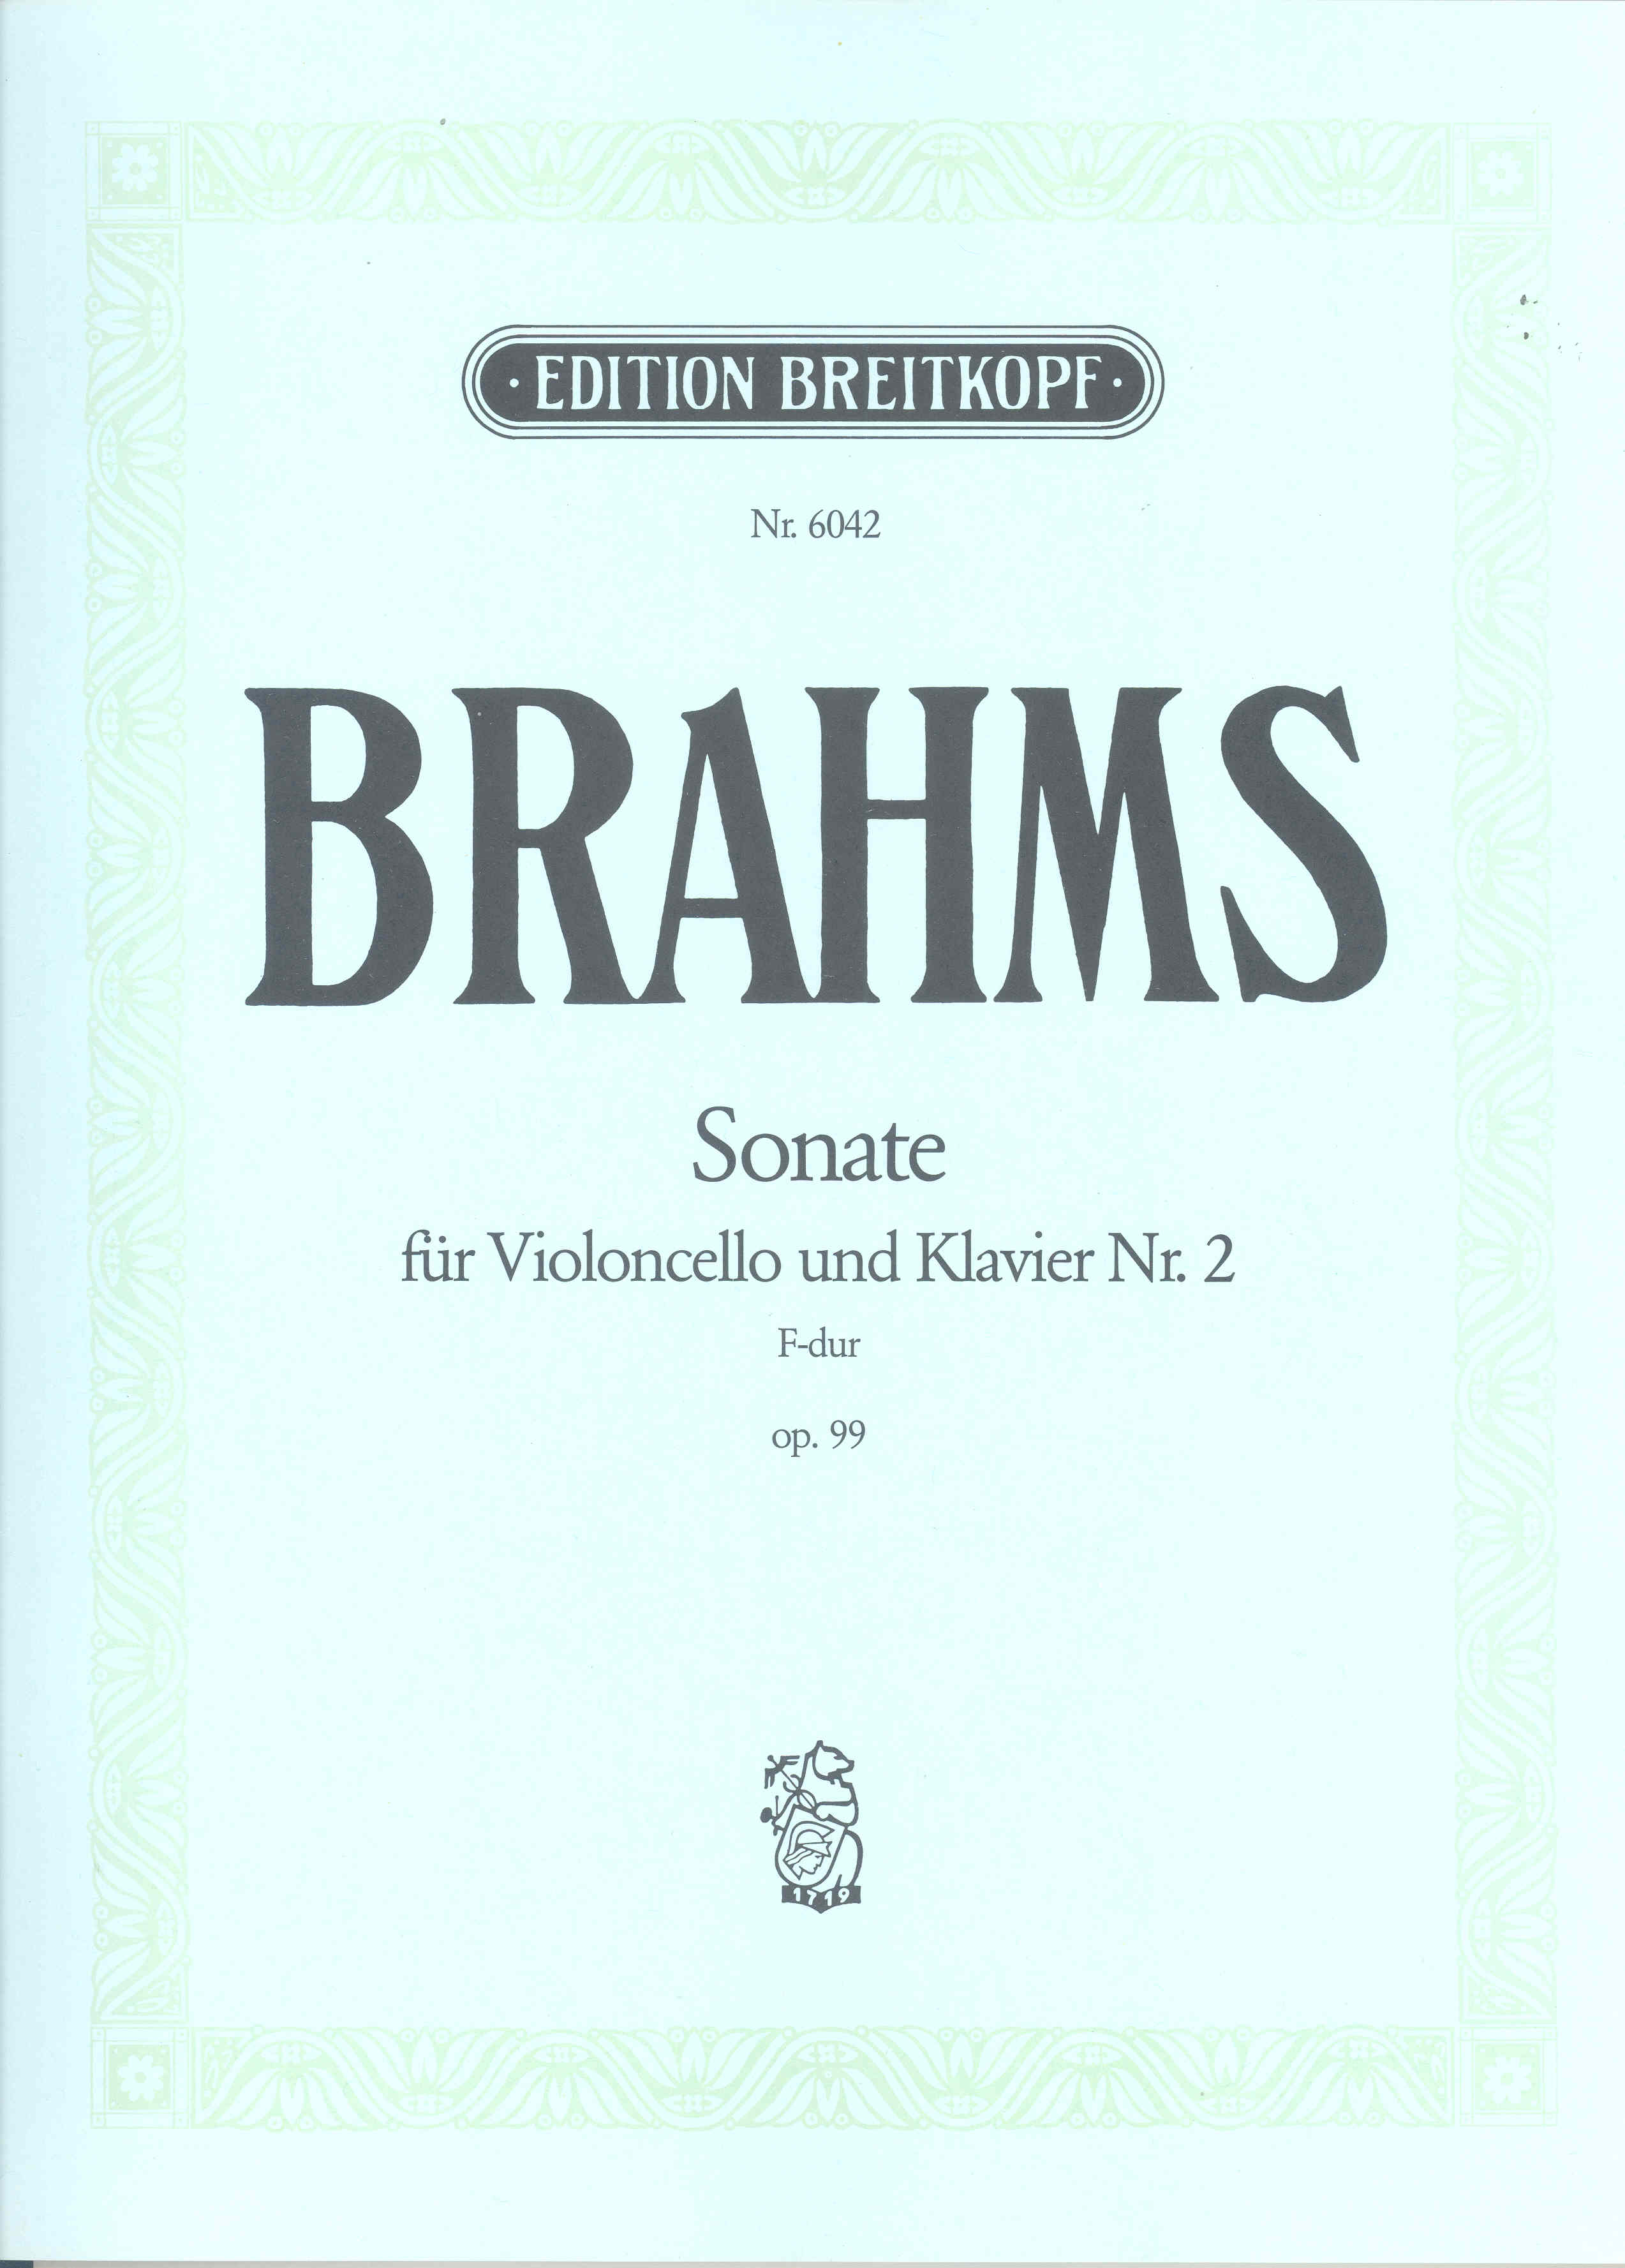 Brahms Sonata In F Major Op. 99 Cello & Piano Sheet Music Songbook